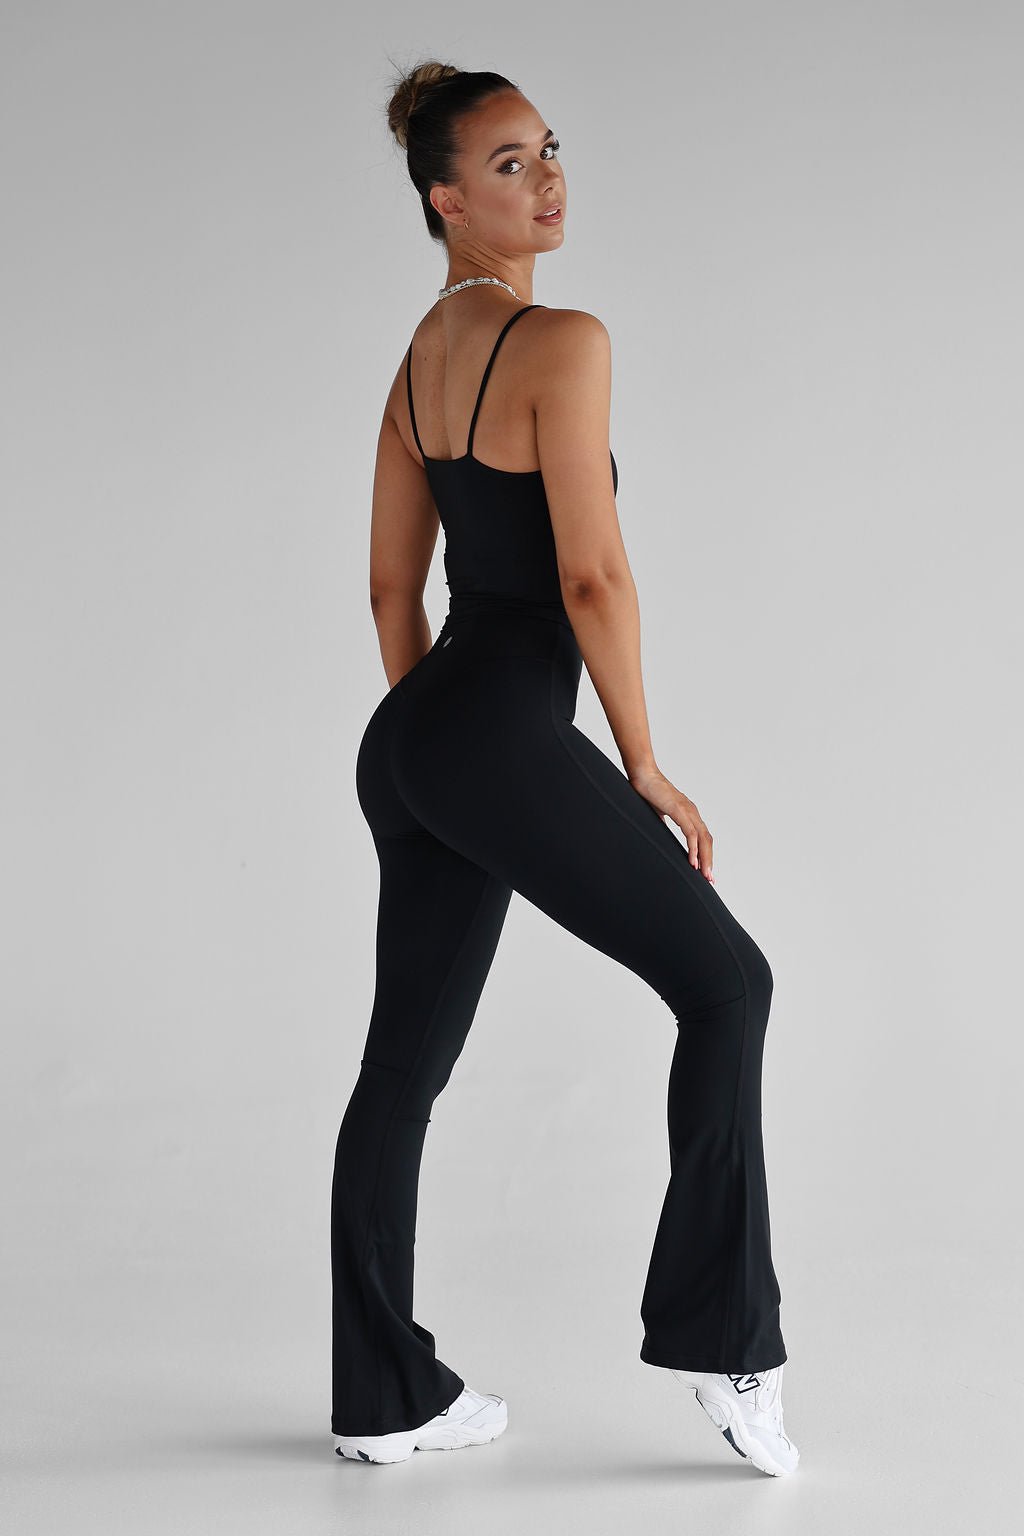 SCULPT Flare Leggings - Charcoal, High Waisted, Squat Proof, 5 Star Rated